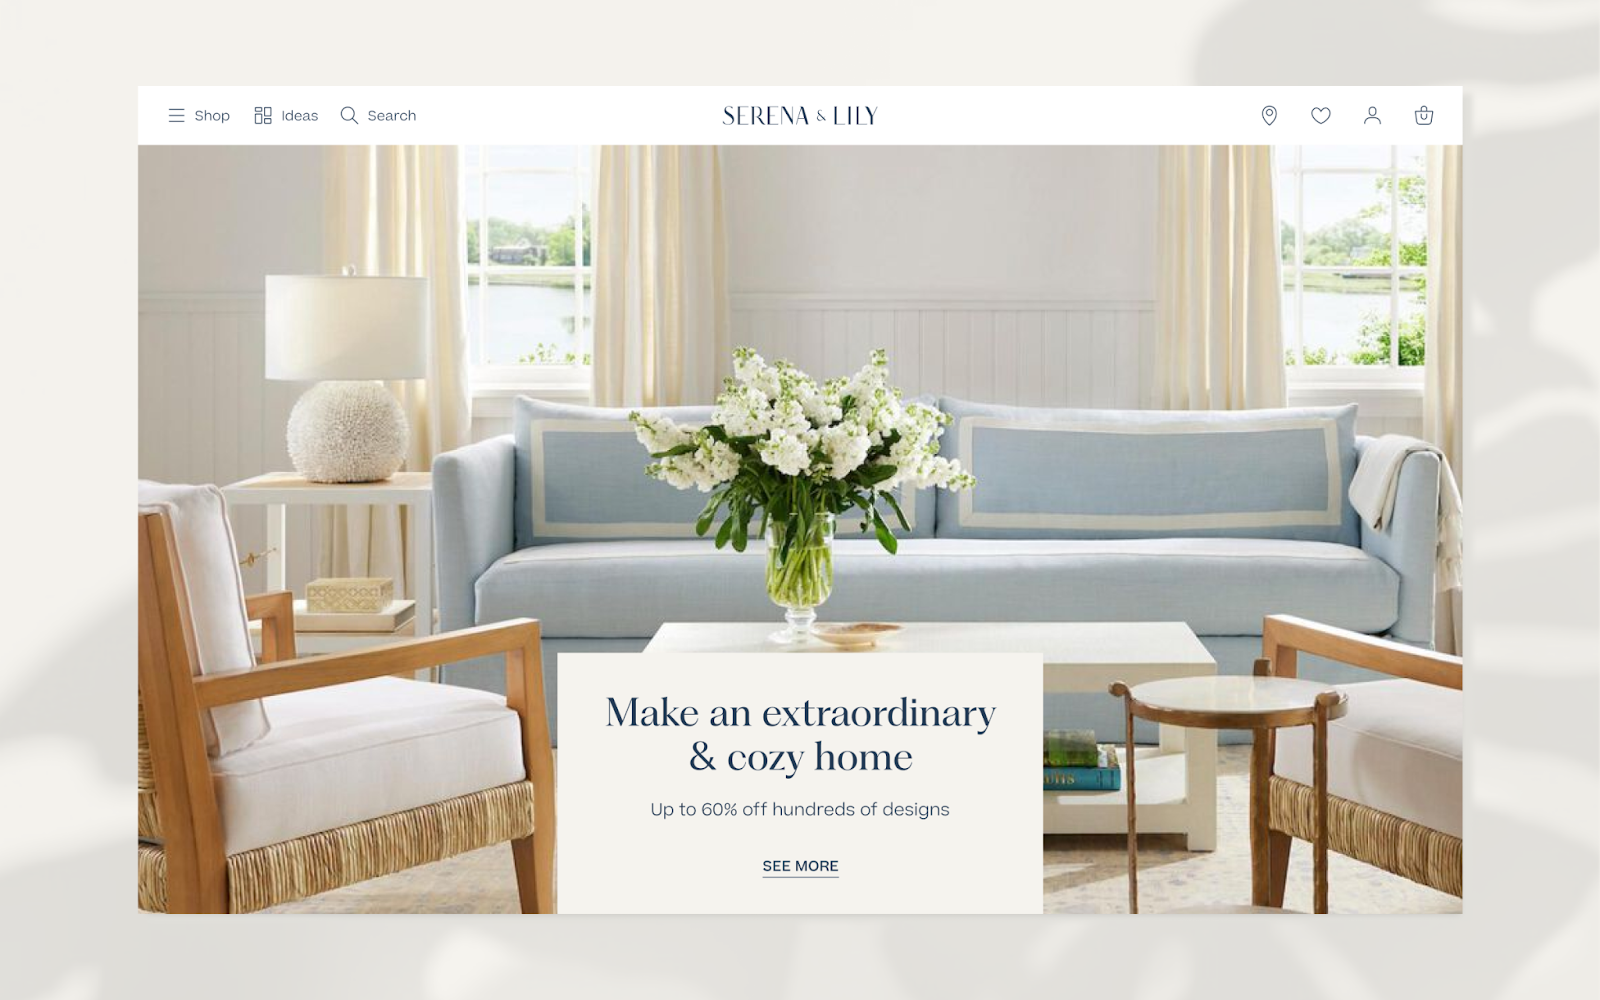 Web design and UX image showcasing the work done by Clay Global for Serena & Lily